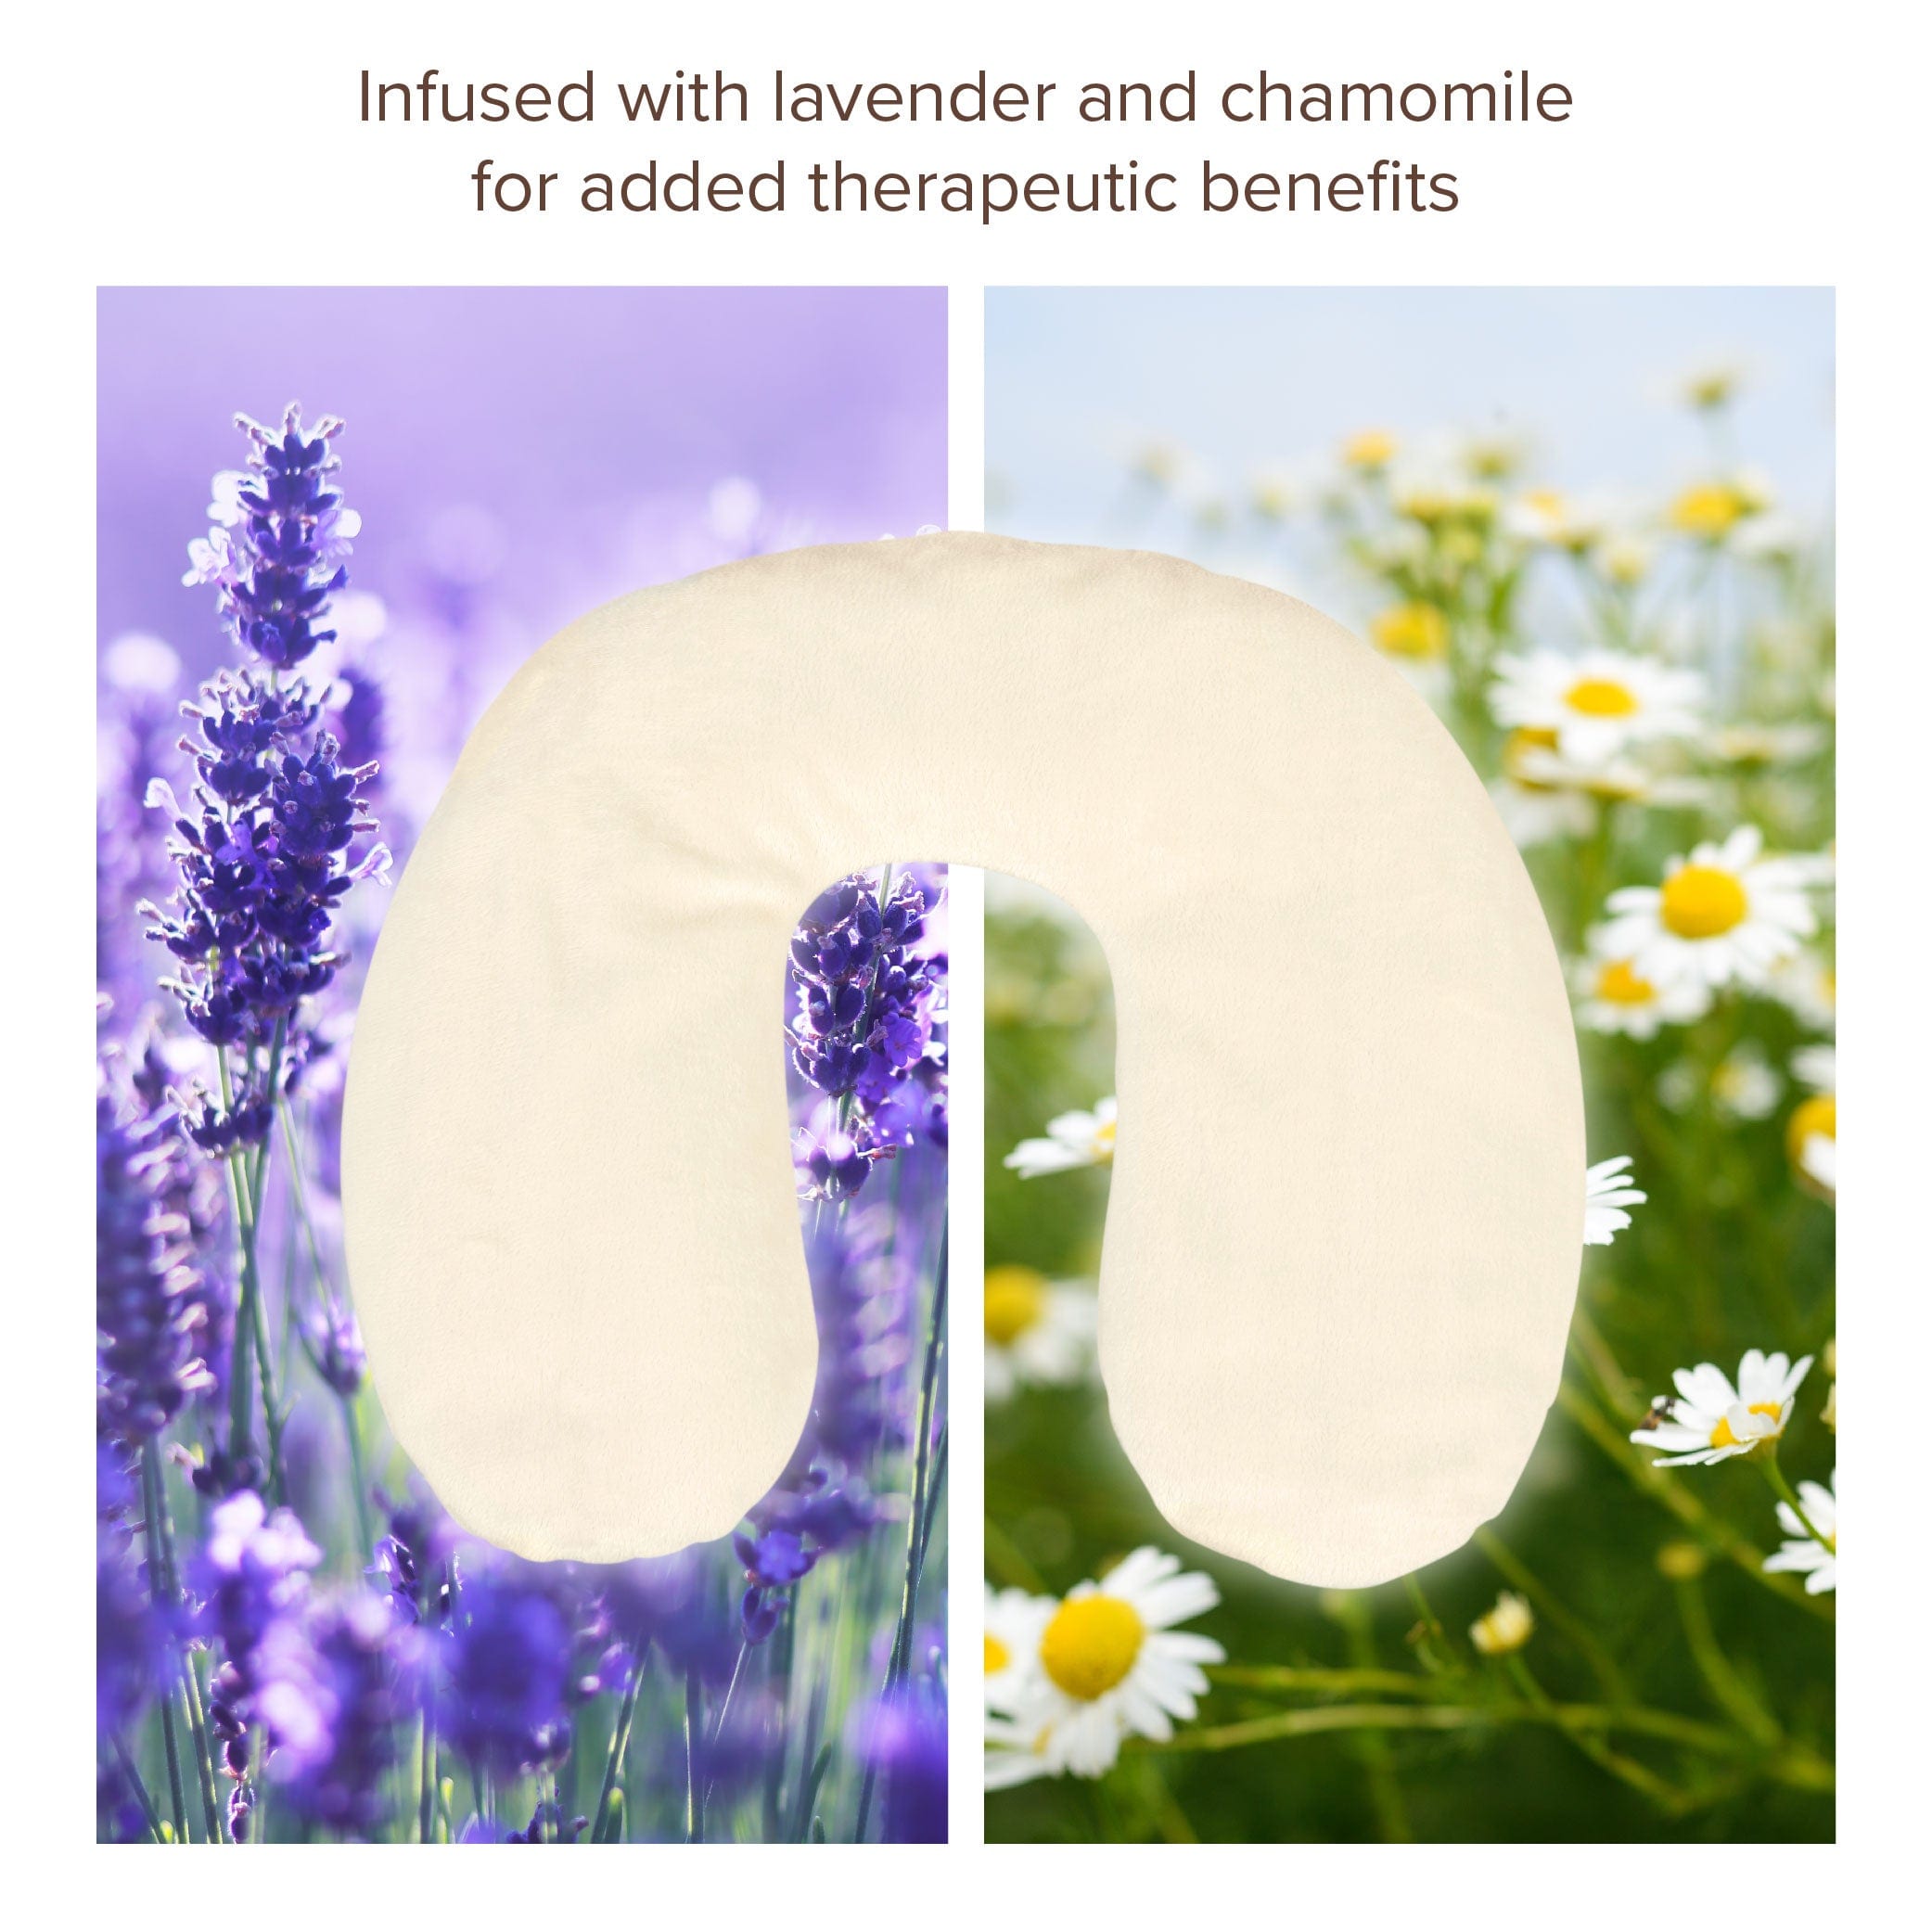 Bed Buddy Neck Pillow - Infused with lavender and chamomile for added therapeutic benefits